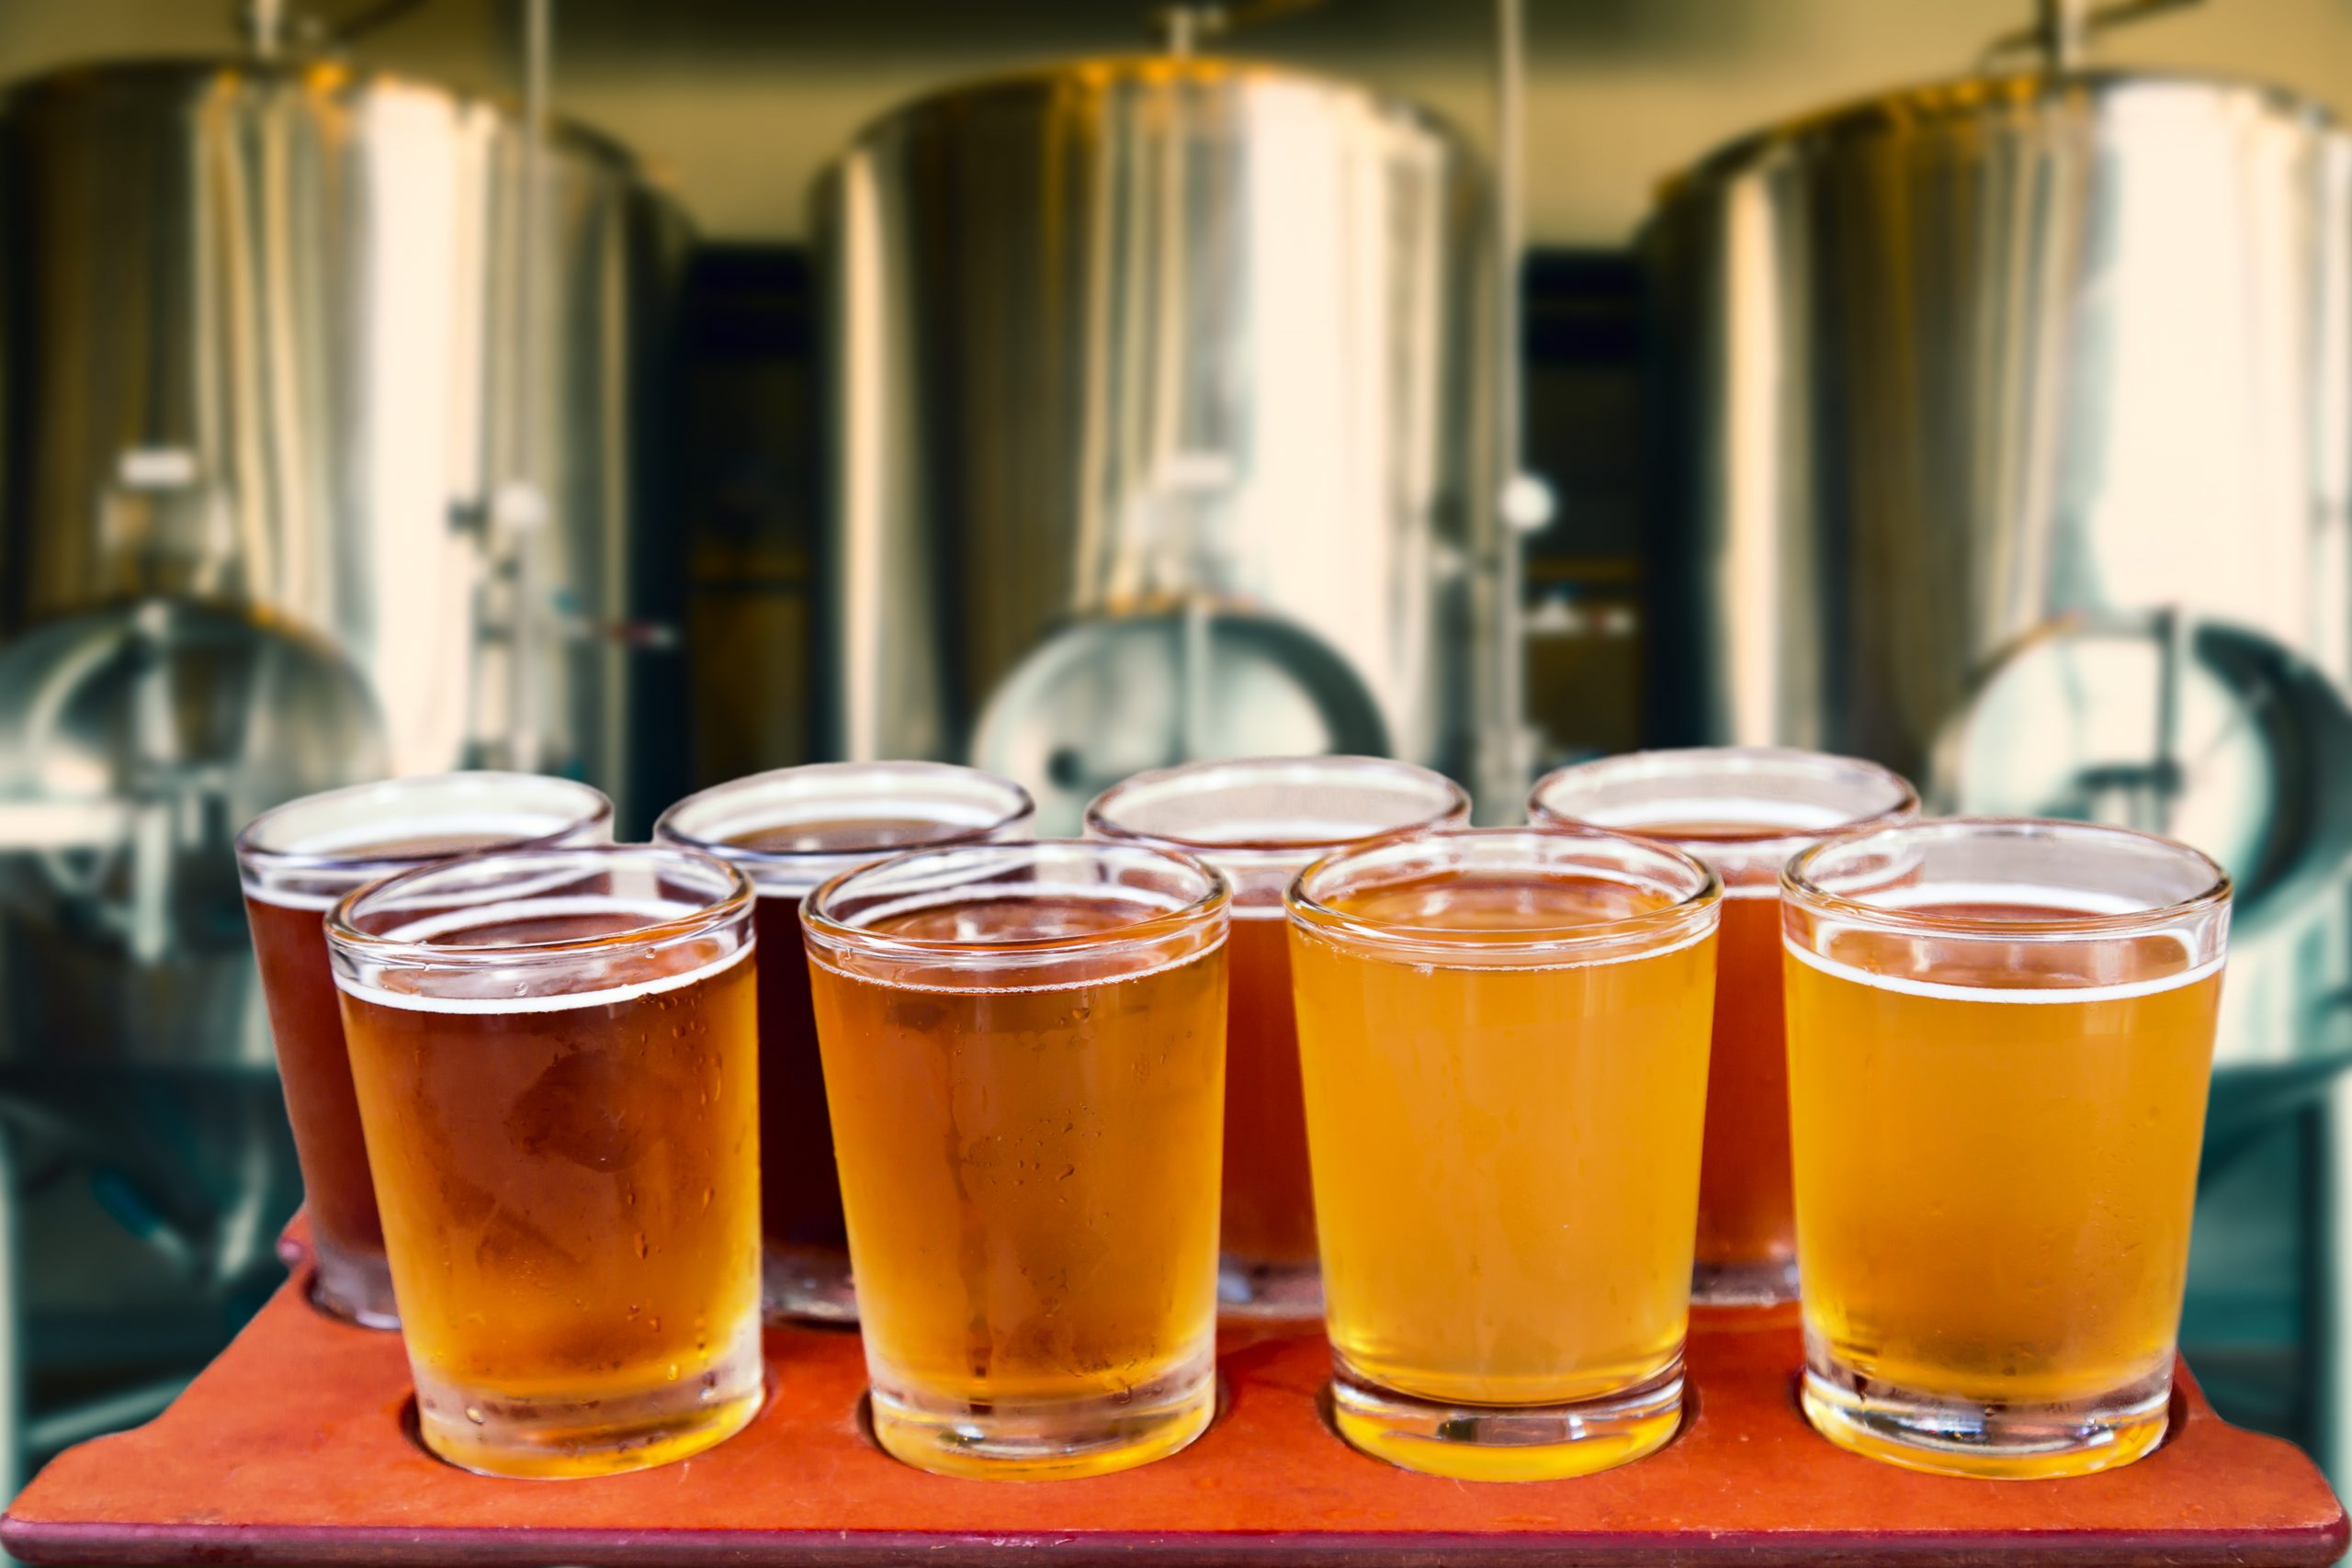 Can Mead Tap into the Craft Beer Market?